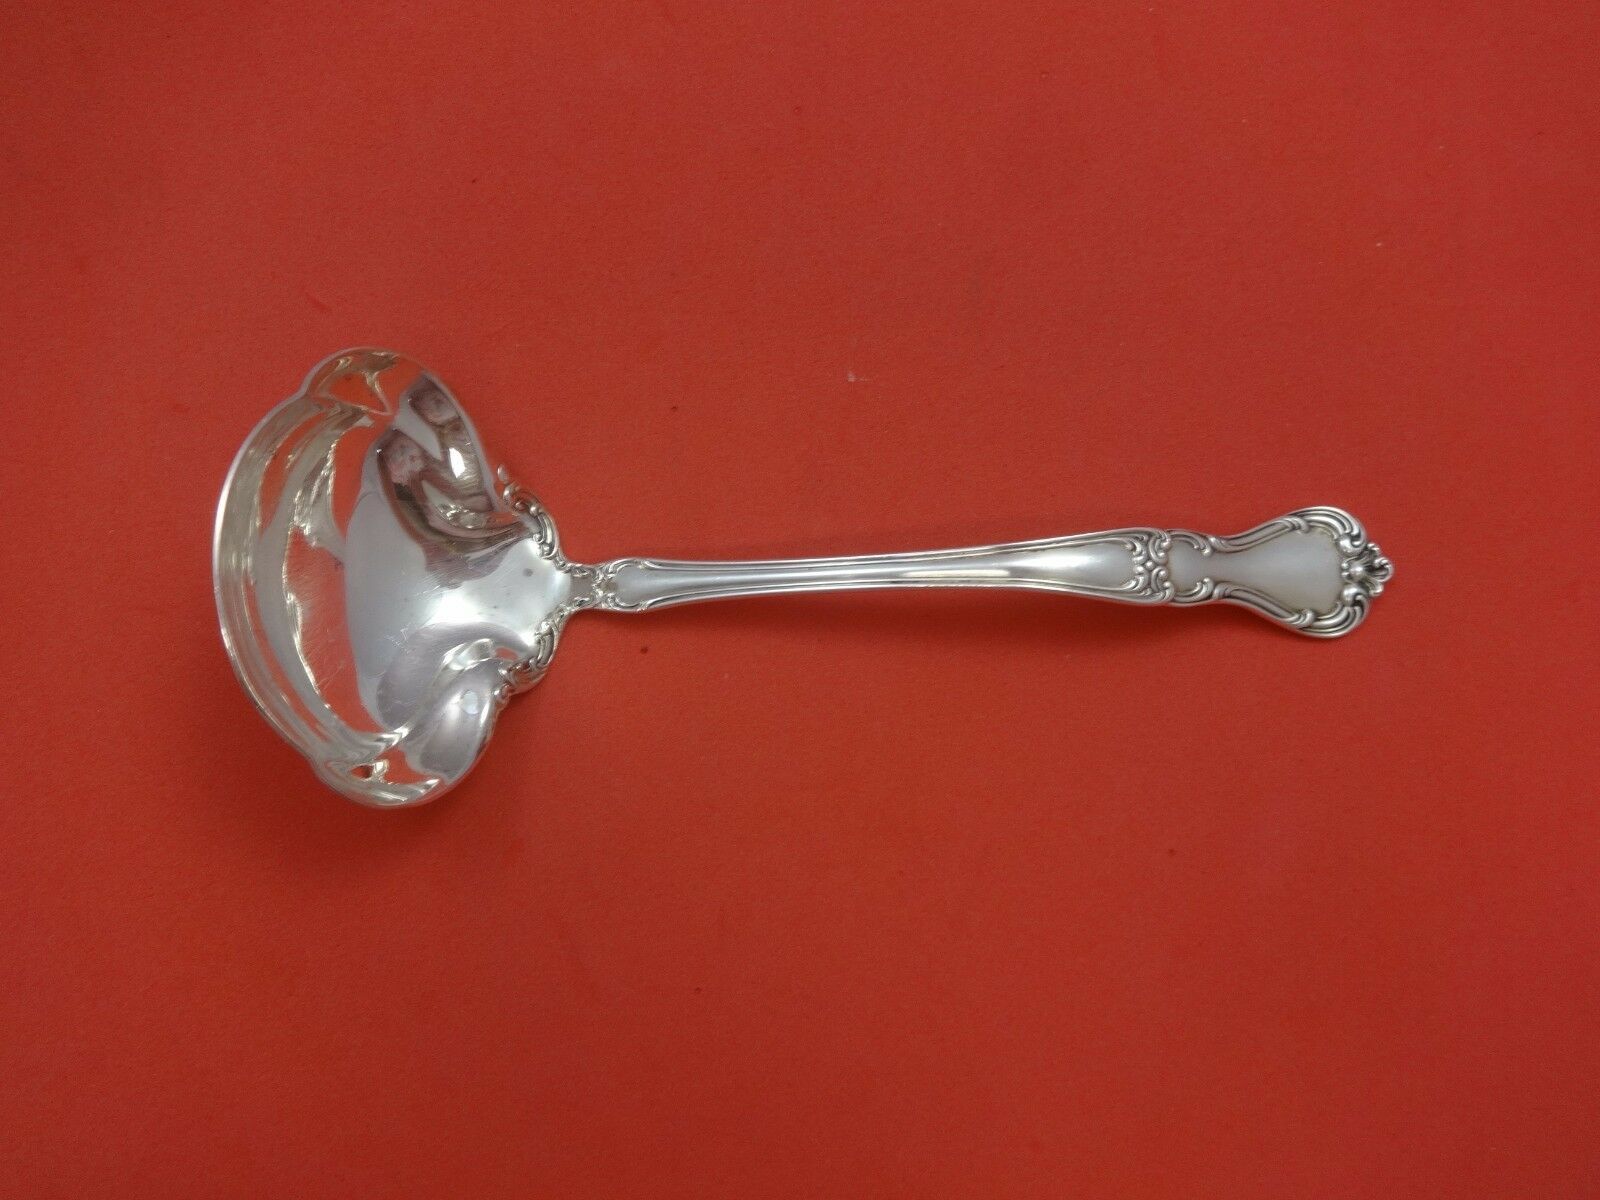 Primary image for Buckingham by Gorham Sterling Silver Gravy Ladle 7 1/2" Serving Antique